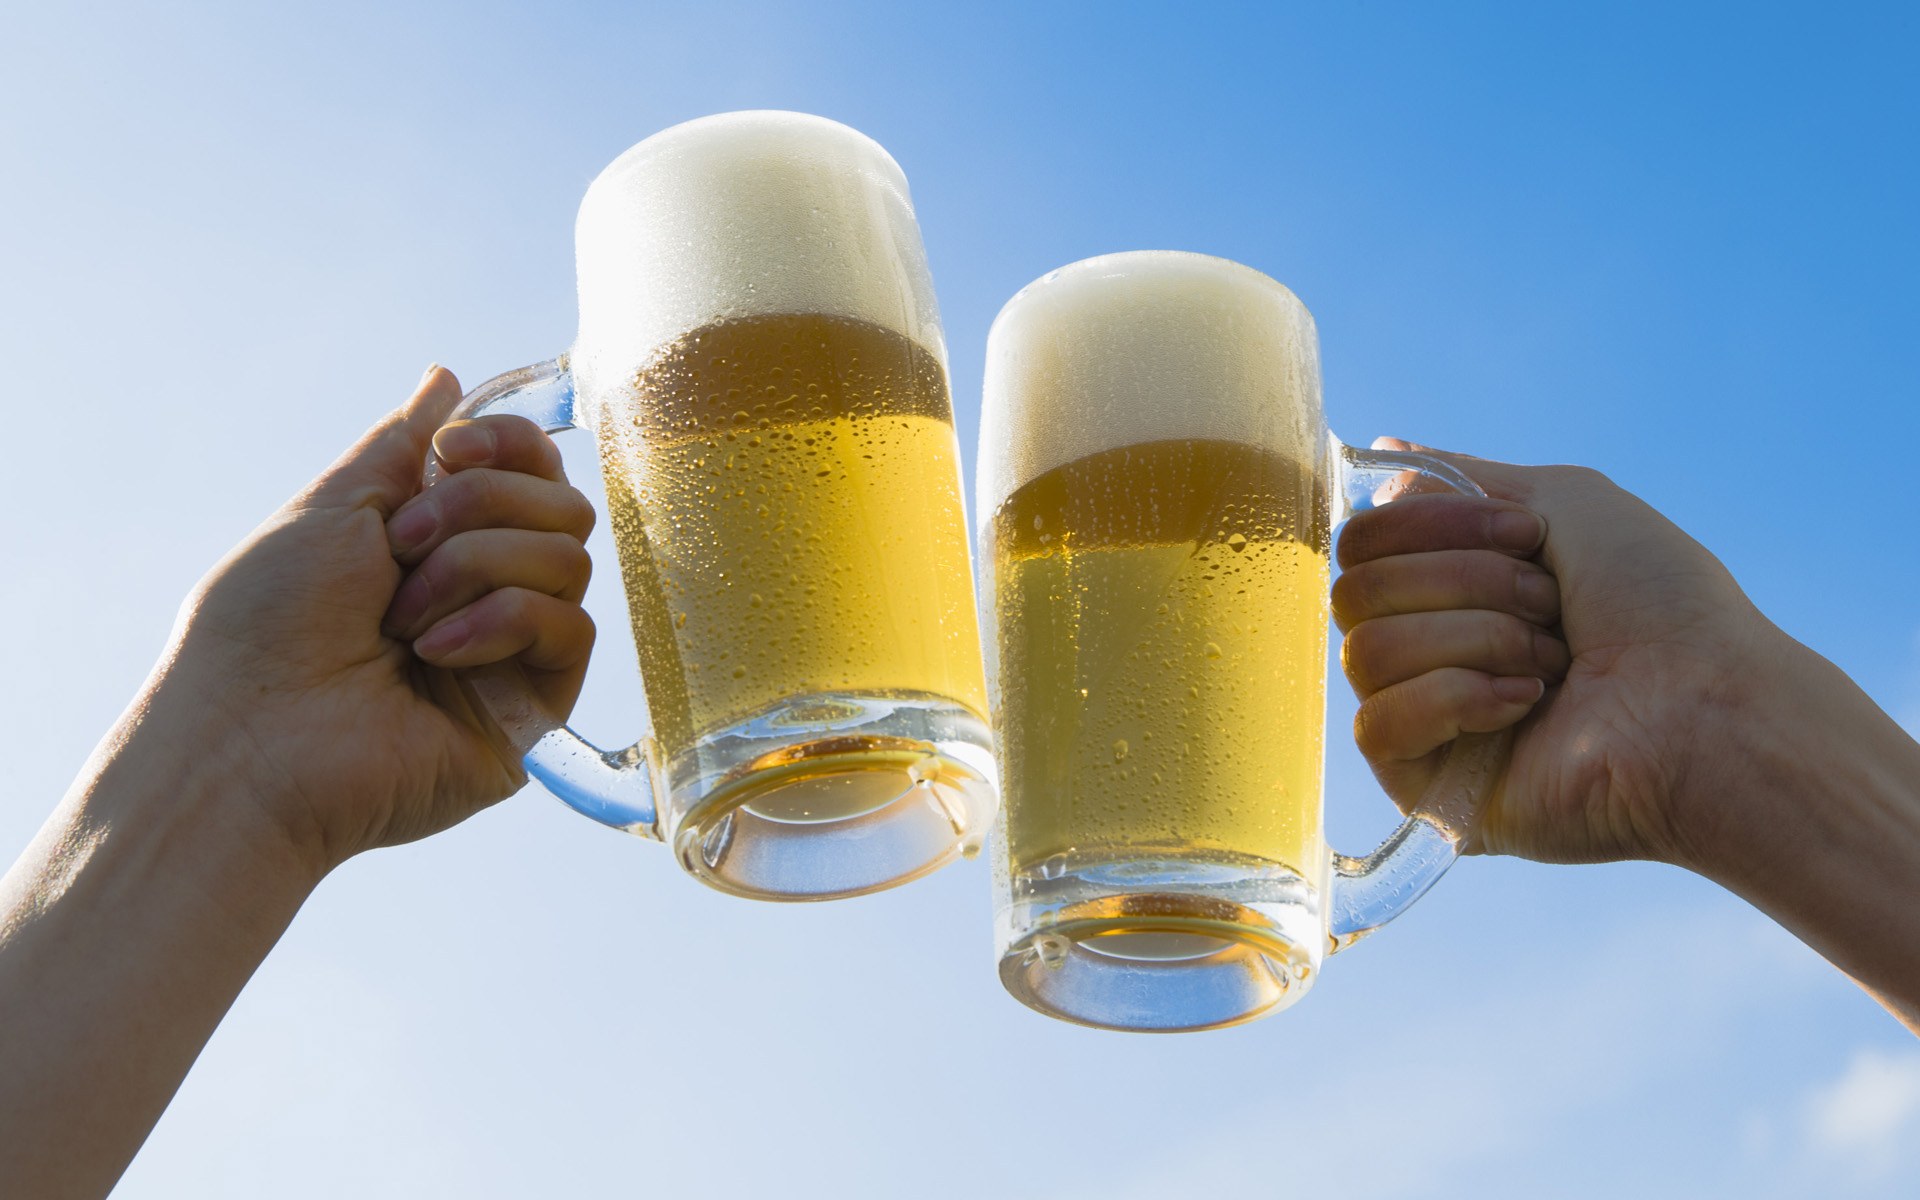 HD Wallpapers HB042 350A People toasting with mugs of beer under blue sky